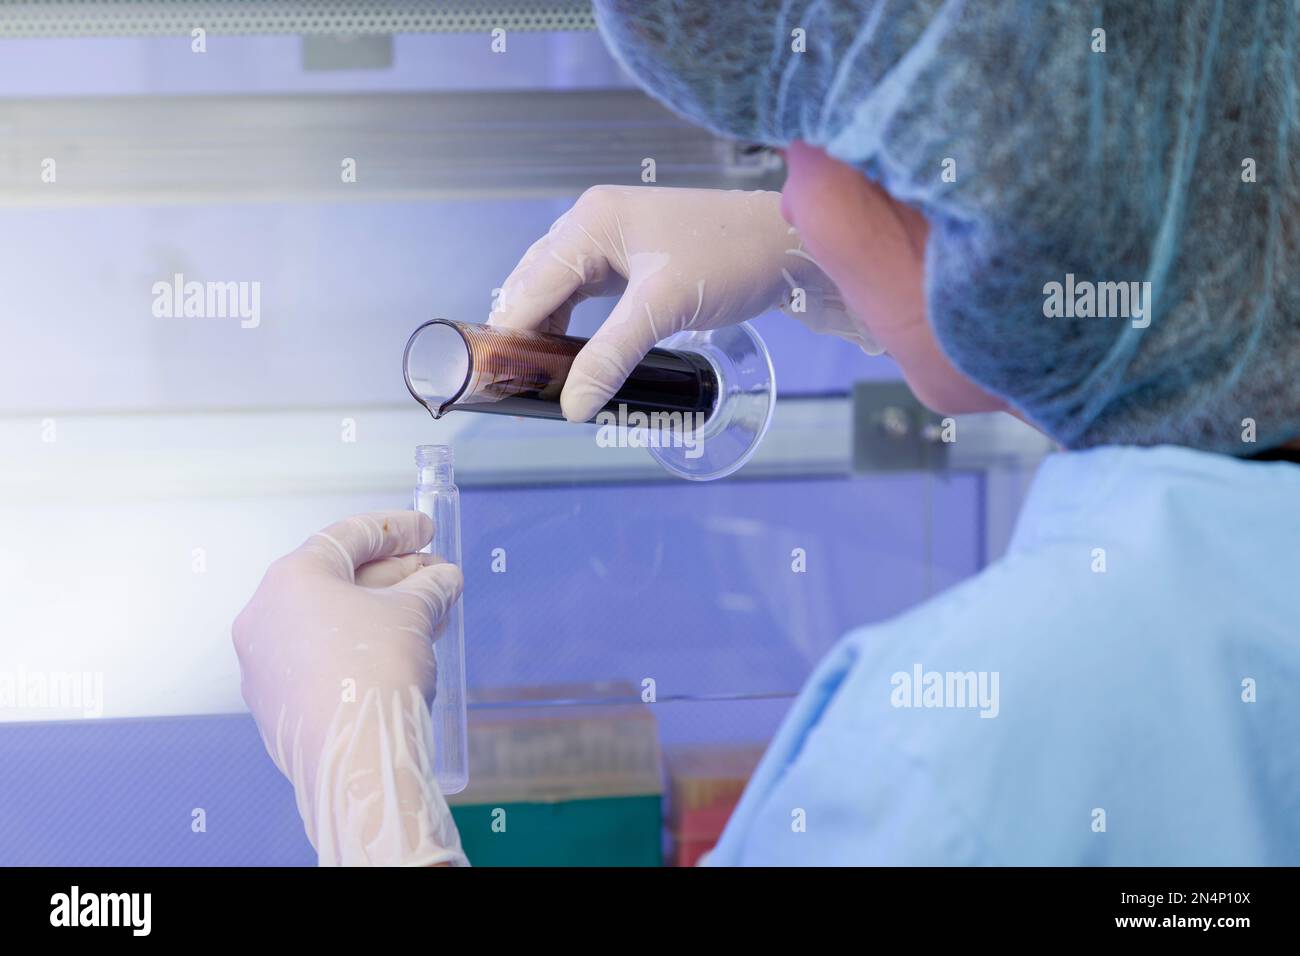 Product Handling In The Chemical Laboratory. Stock Photo